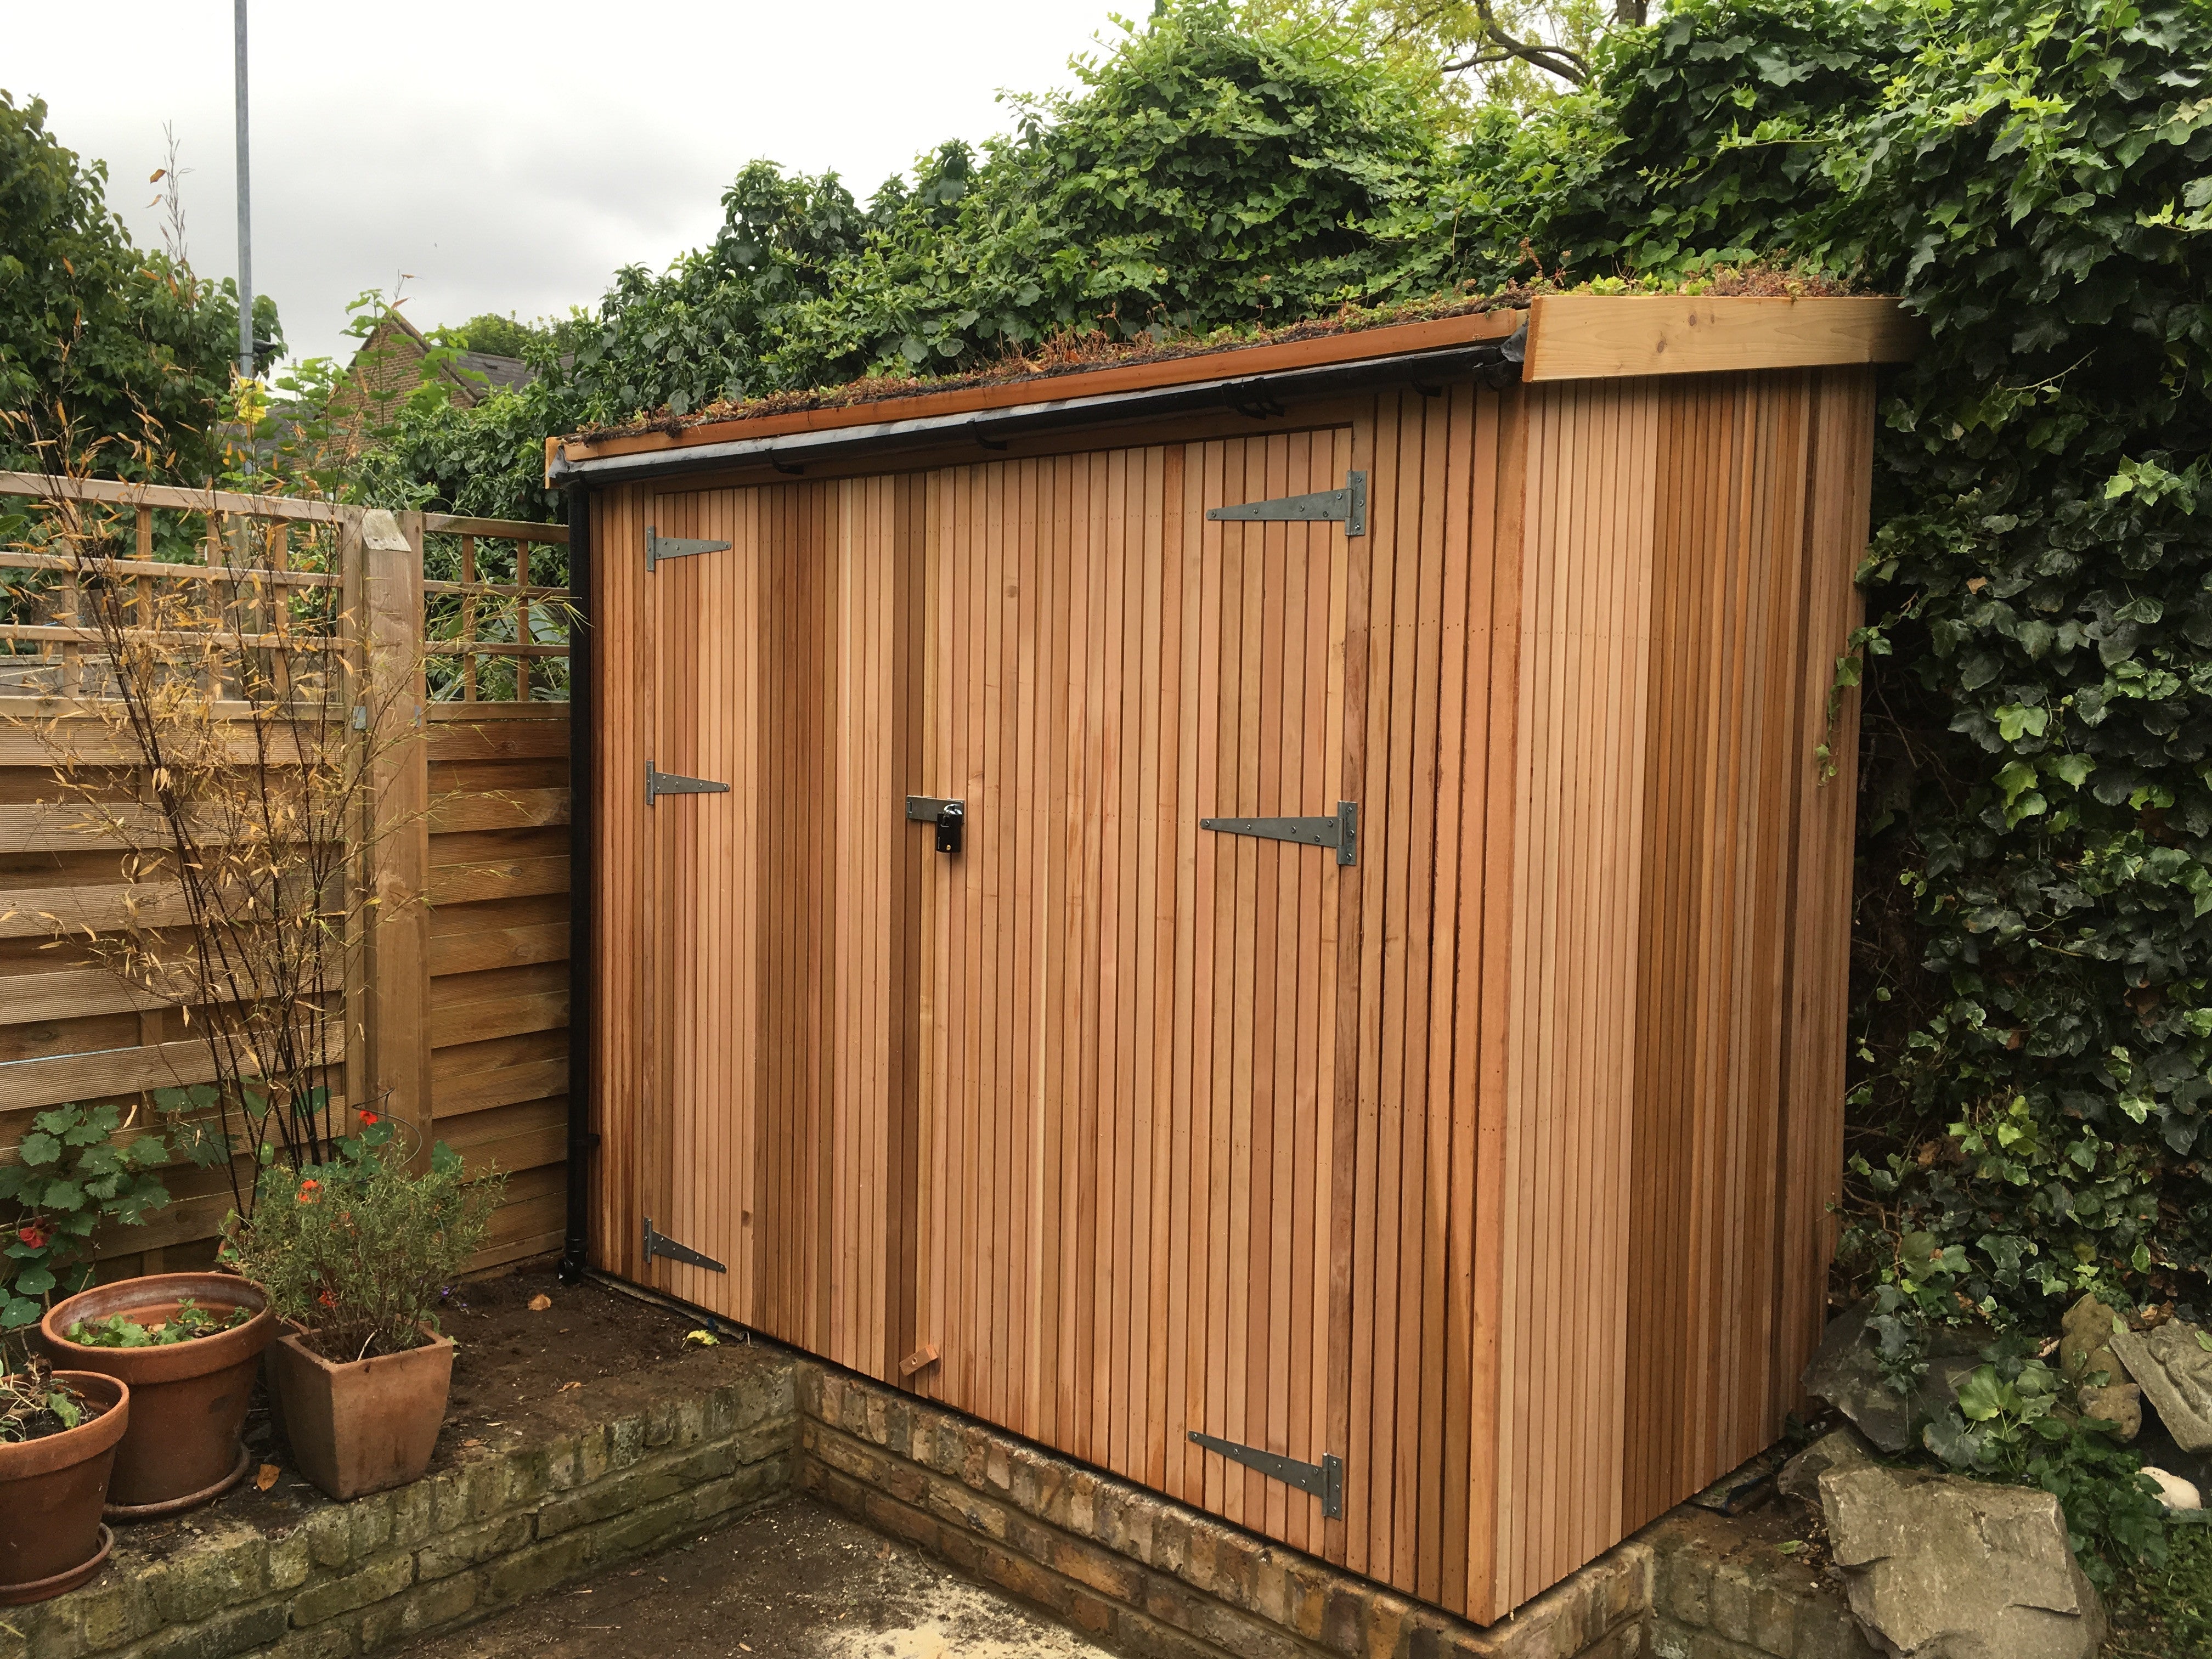 Brighton Bike Sheds, built to fit your space